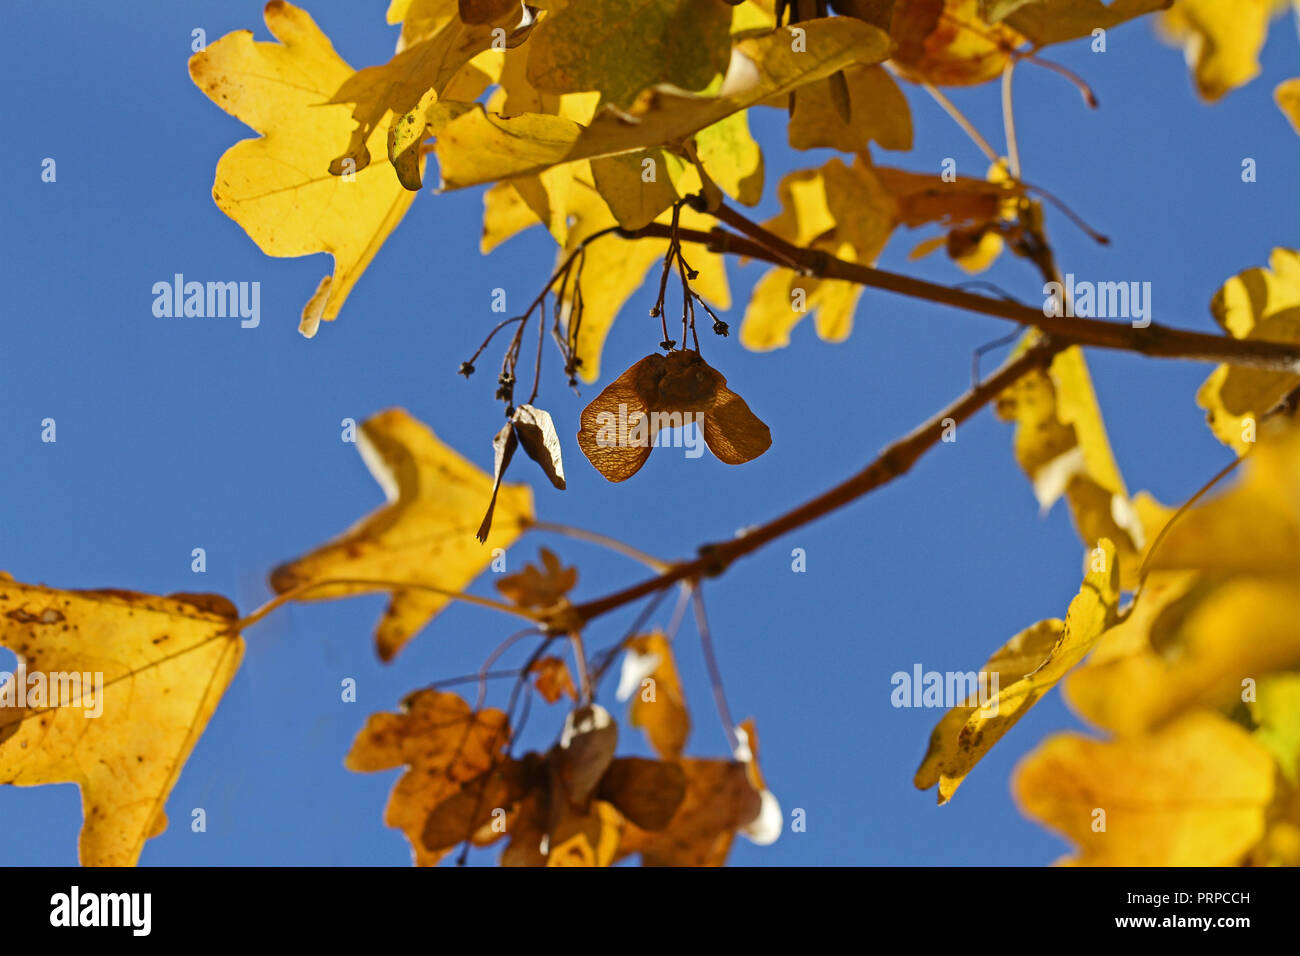 maple or sycamore leaves with the sun behind in early autumn or fall in Italy Latin acer opalus or acer pseudoplatanus from an Italian maple Stock Photo